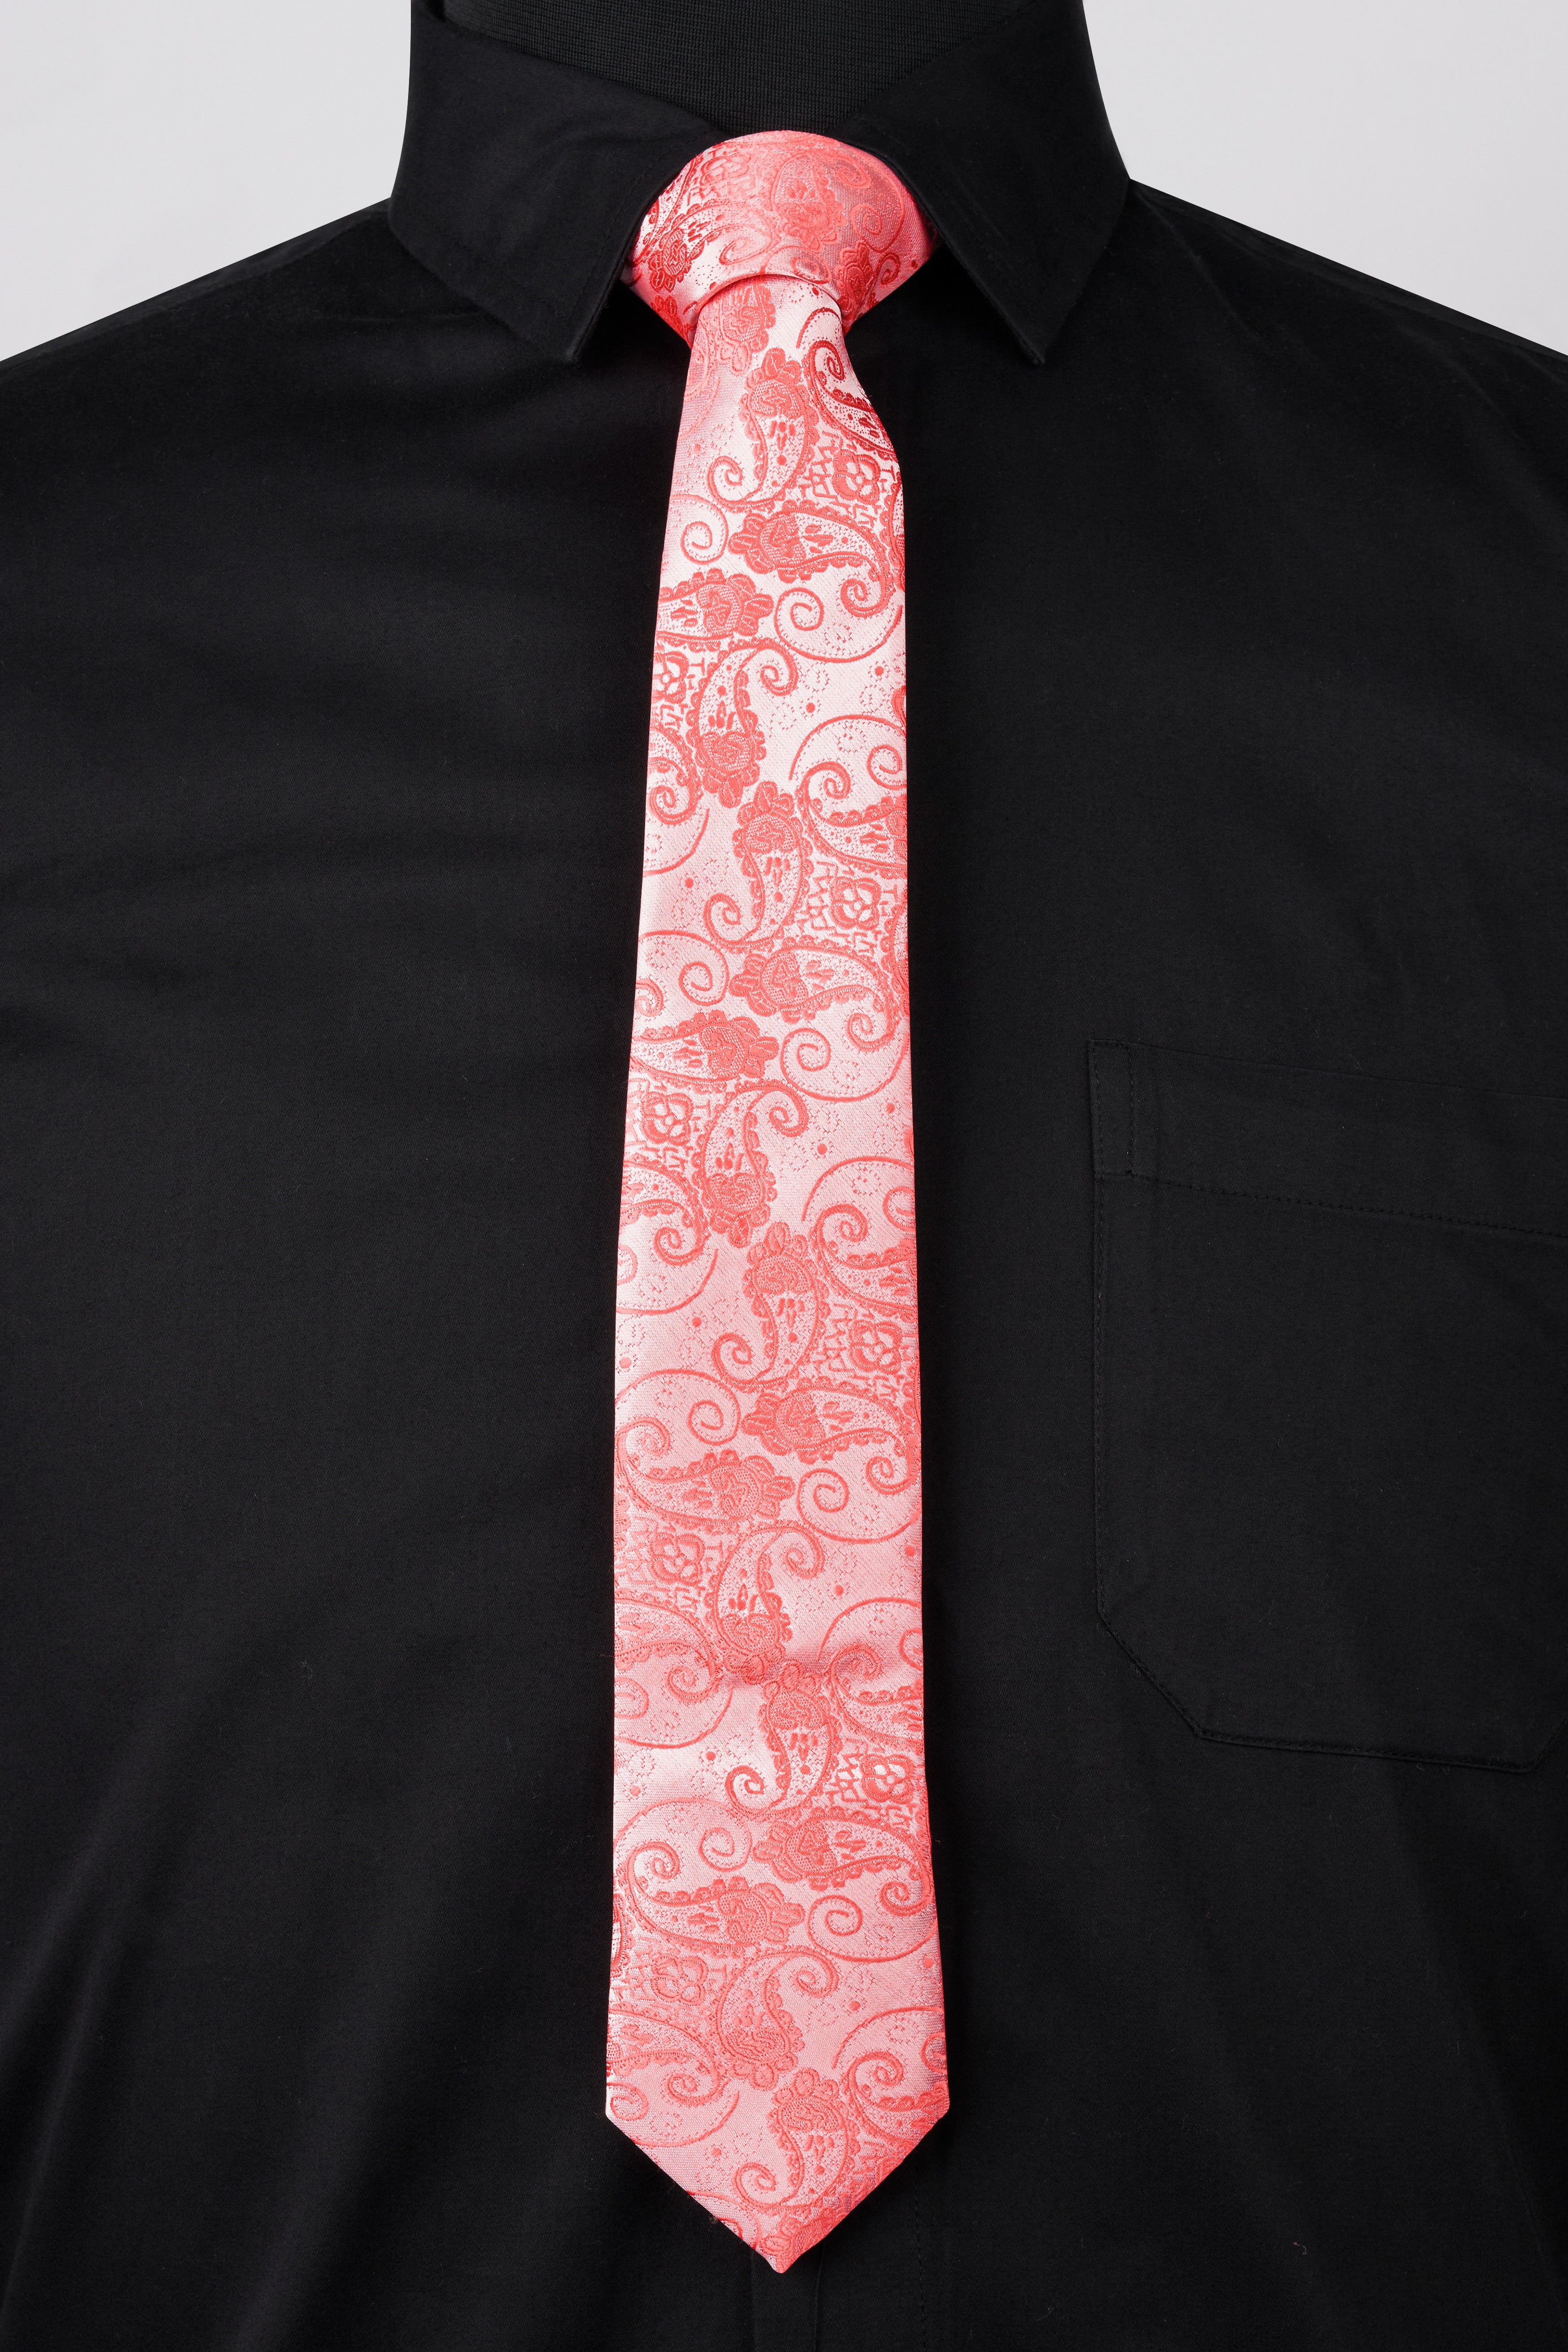 Geraldine Pink with Peach Paisley Jacquard Tie with Pocket Square TP044